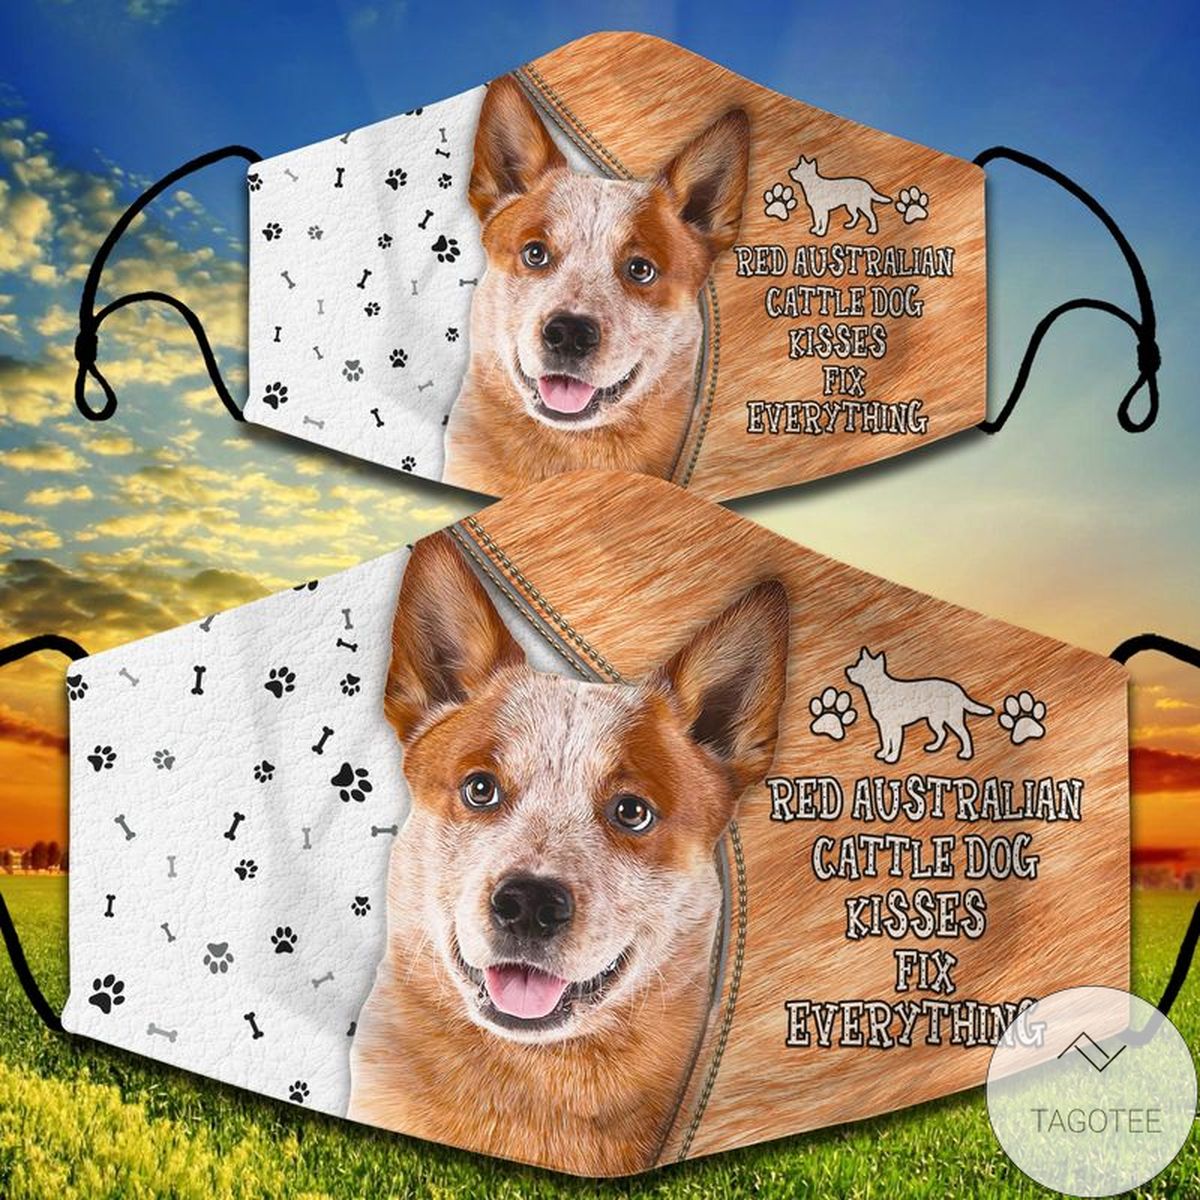 Red Australian Cattle Dog Kisses Fix Everything Mask